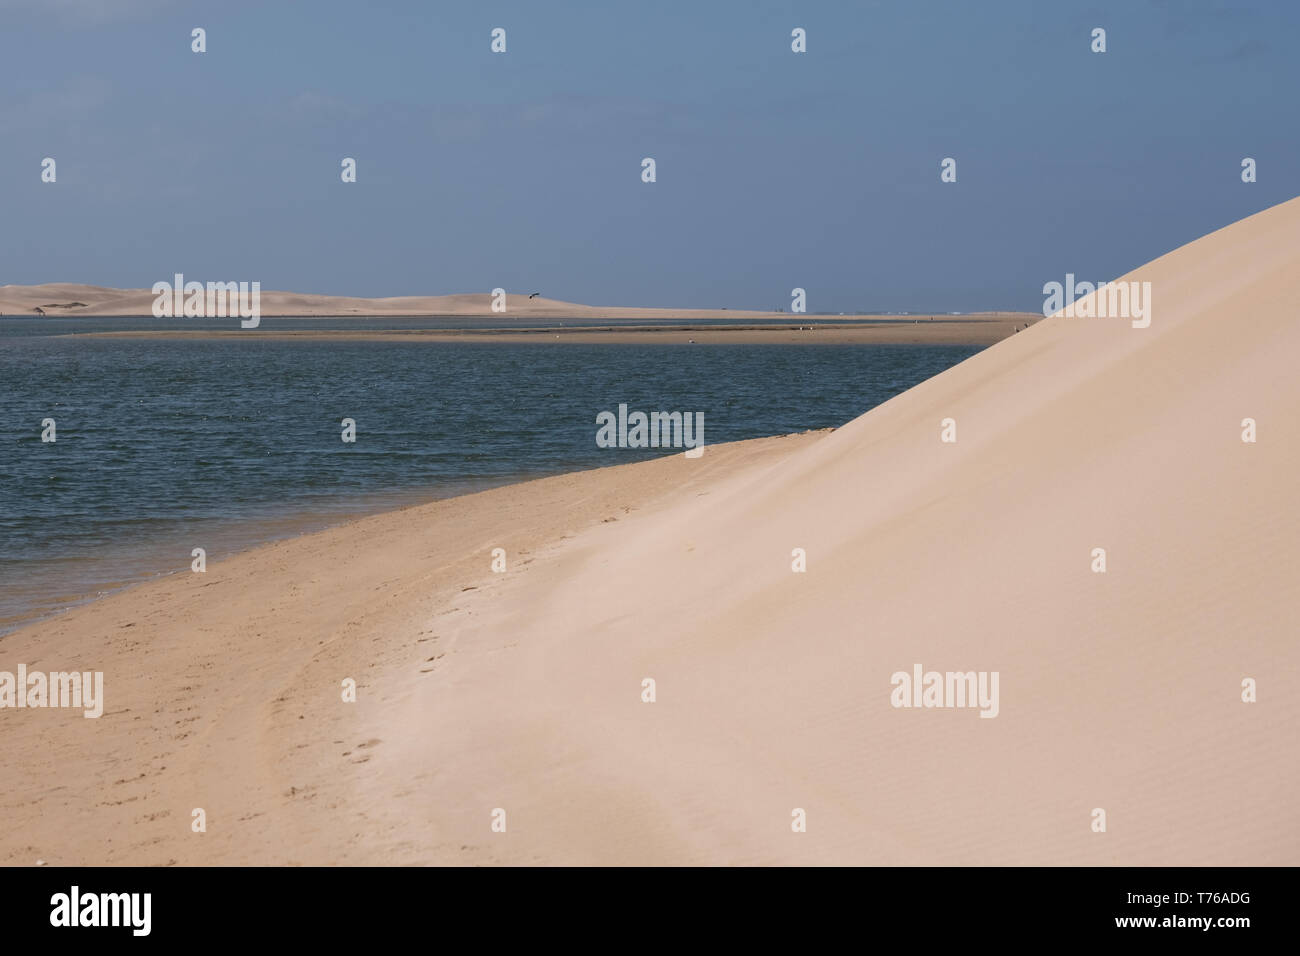 The Alexandria coastal dune fields with the sea in the distance, near ...